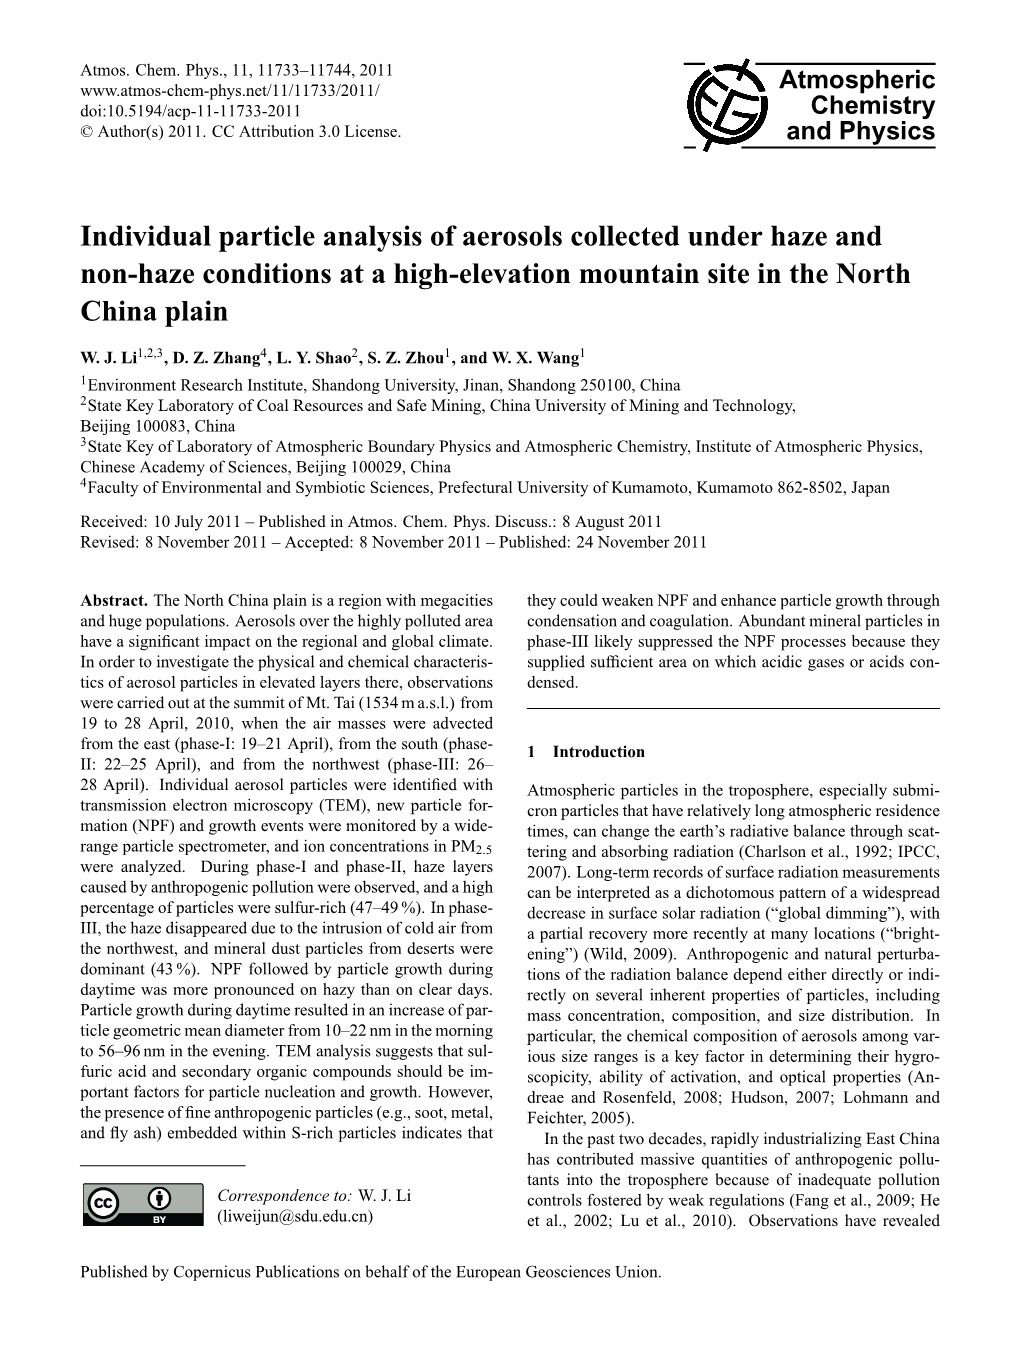 Individual Particle Analysis of Aerosols Collected Under Haze and Non-Haze Conditions at a High-Elevation Mountain Site in the North China Plain